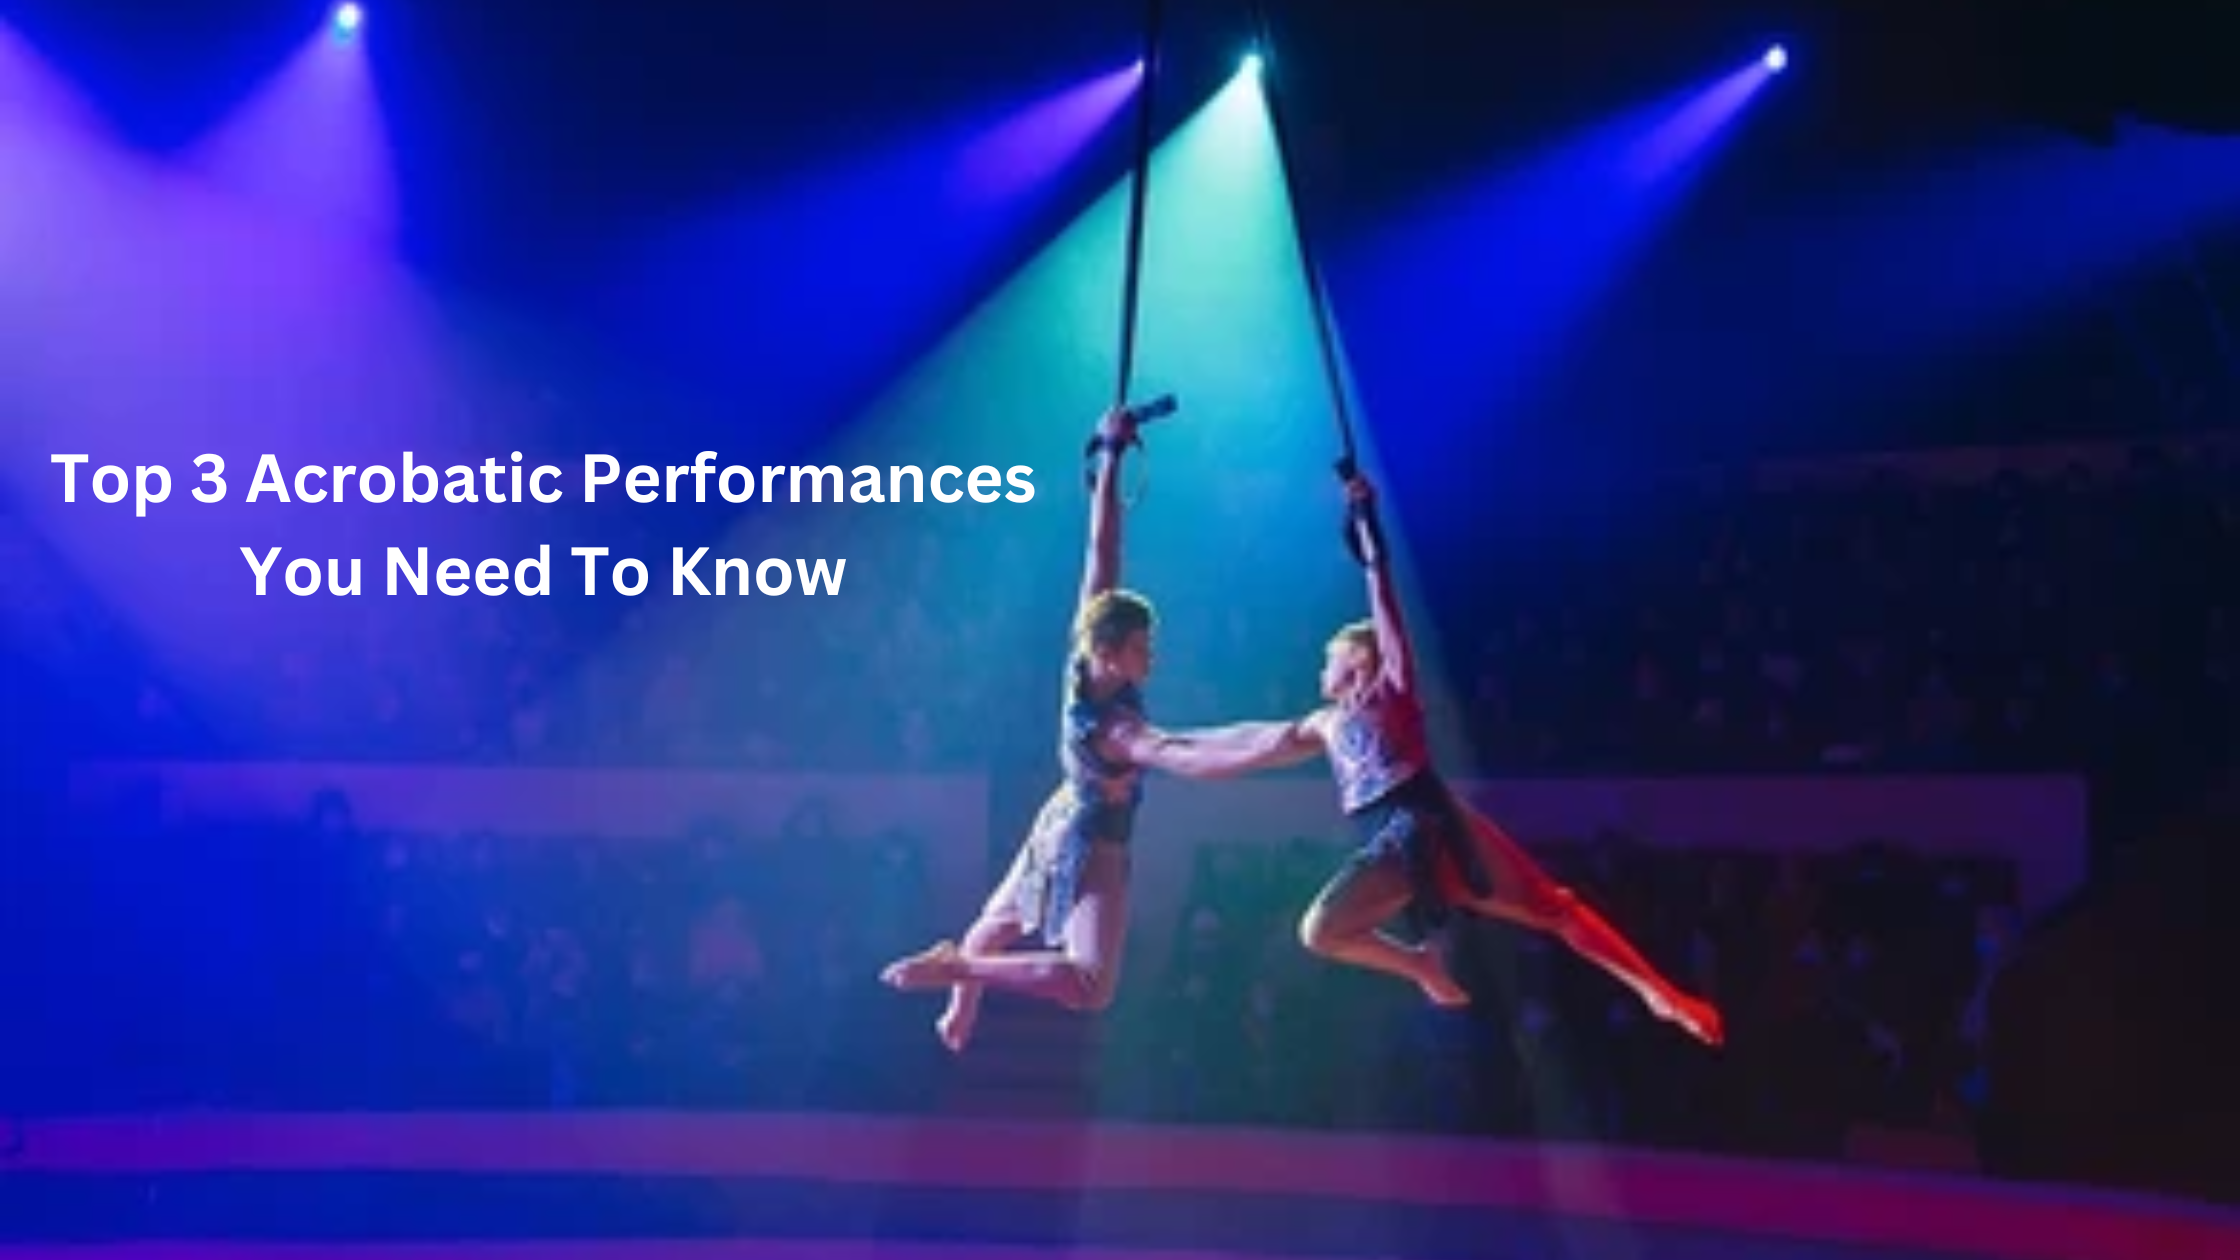 Top 3 Acrobatic Performances You Need To Know